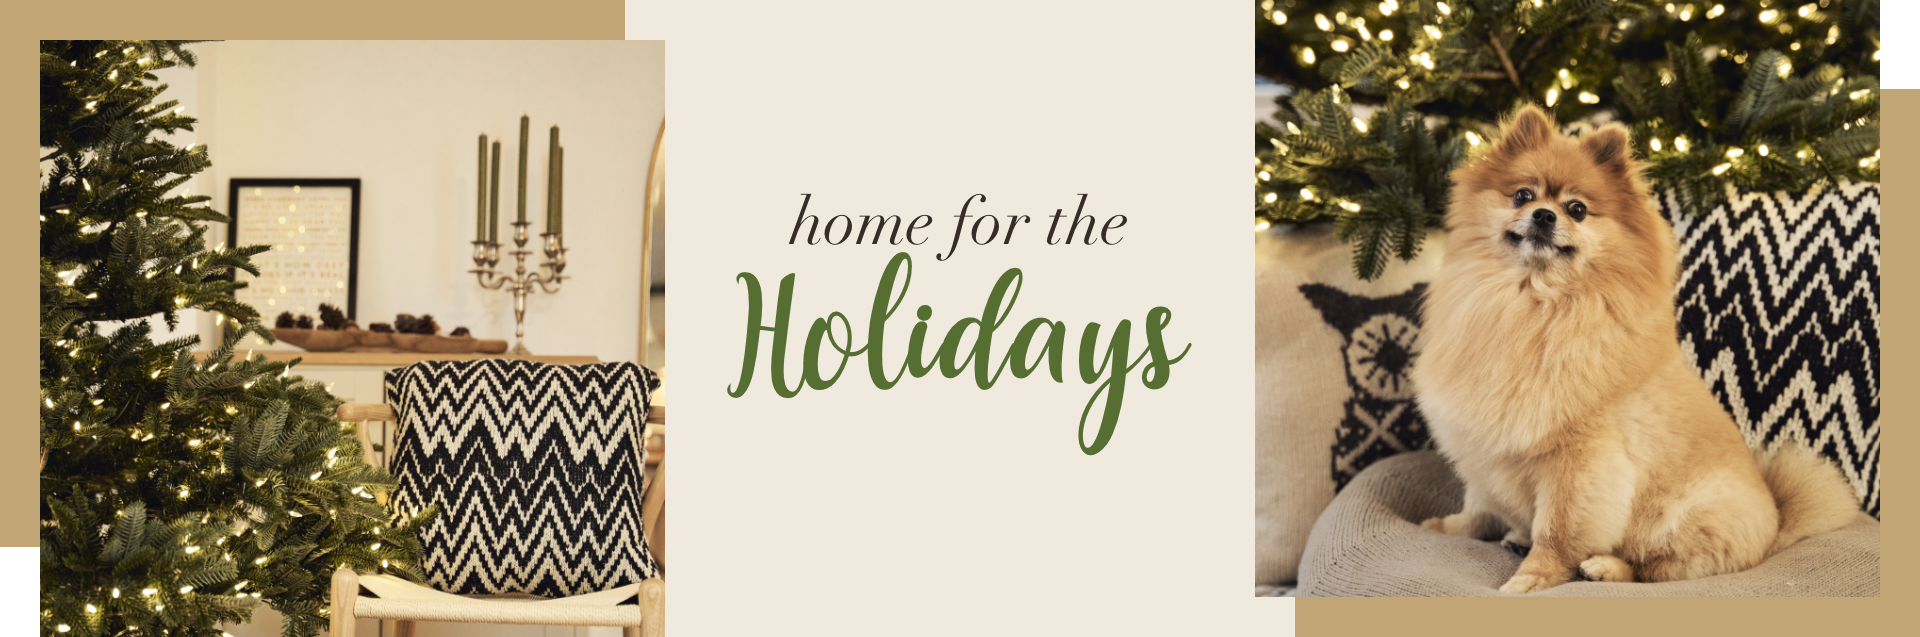 Home For The Holidays banner